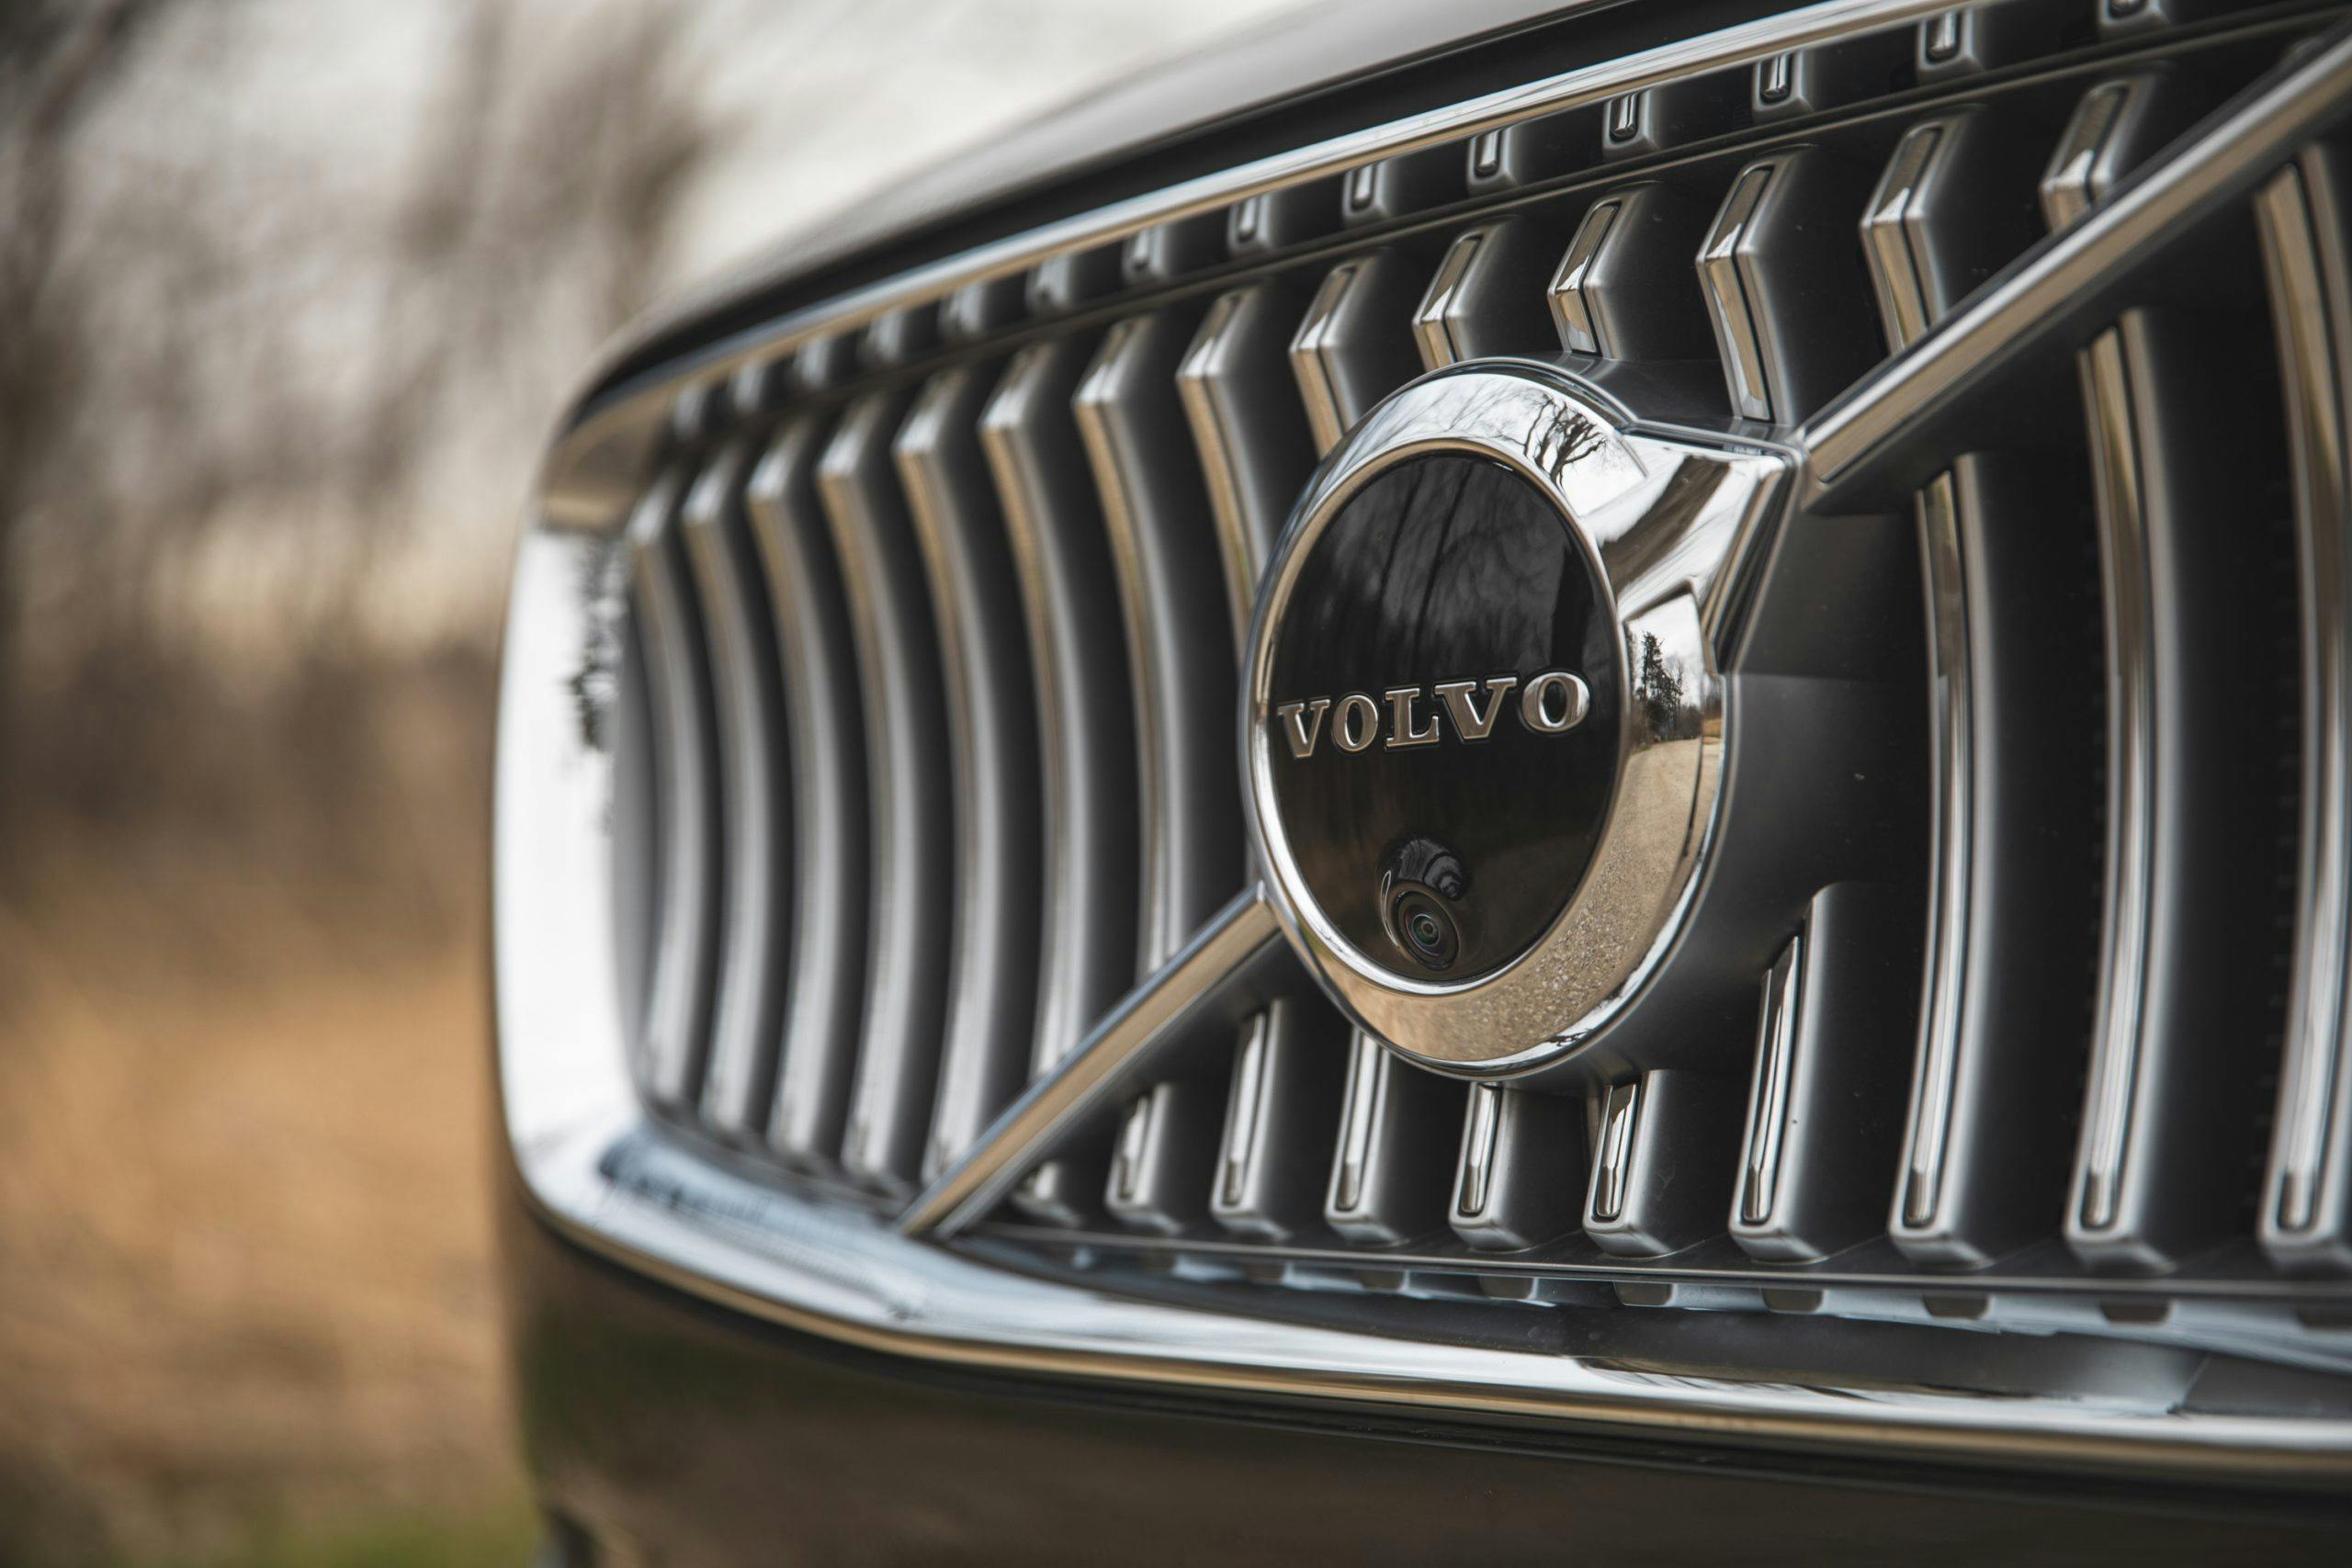 Volvo XC90 front grill